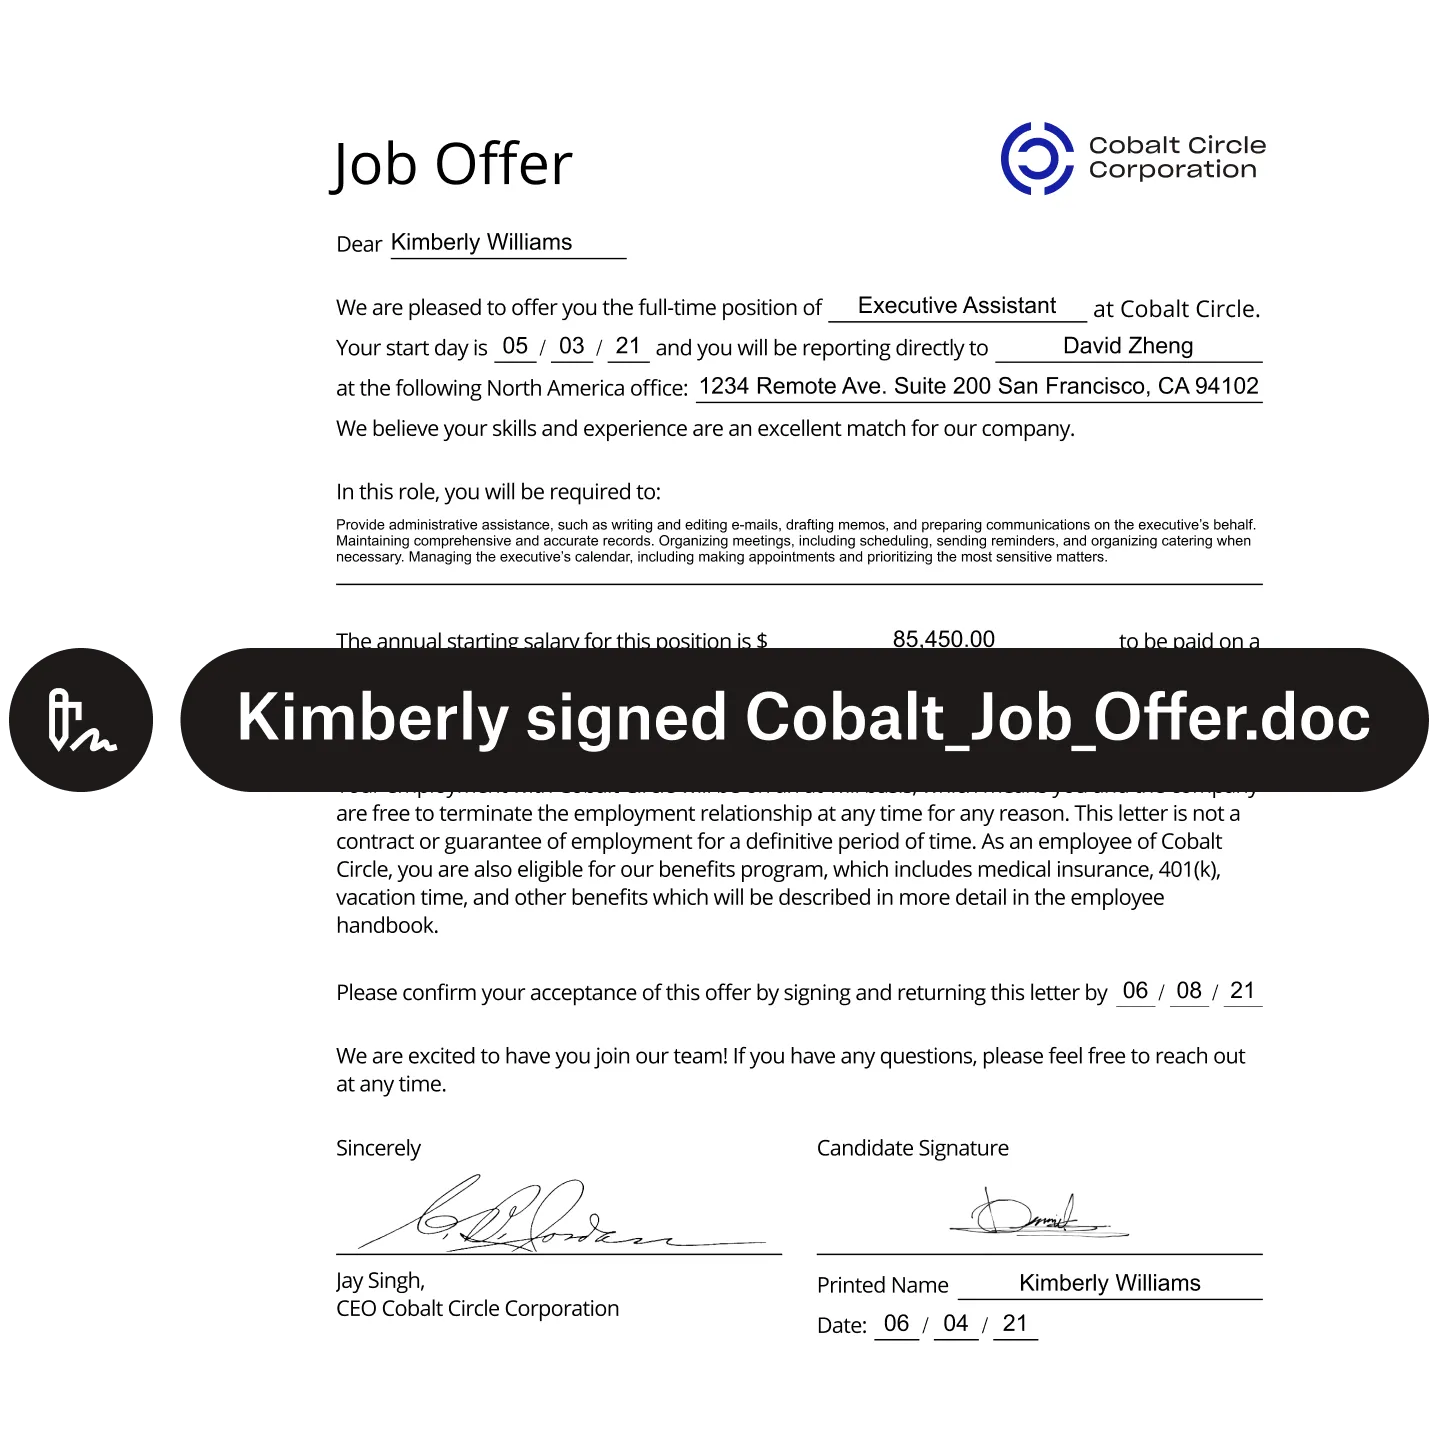 A product visual showing the first page of a job offer with a label stating “Kimberly signed Cobalt_Job_Offer.doc”